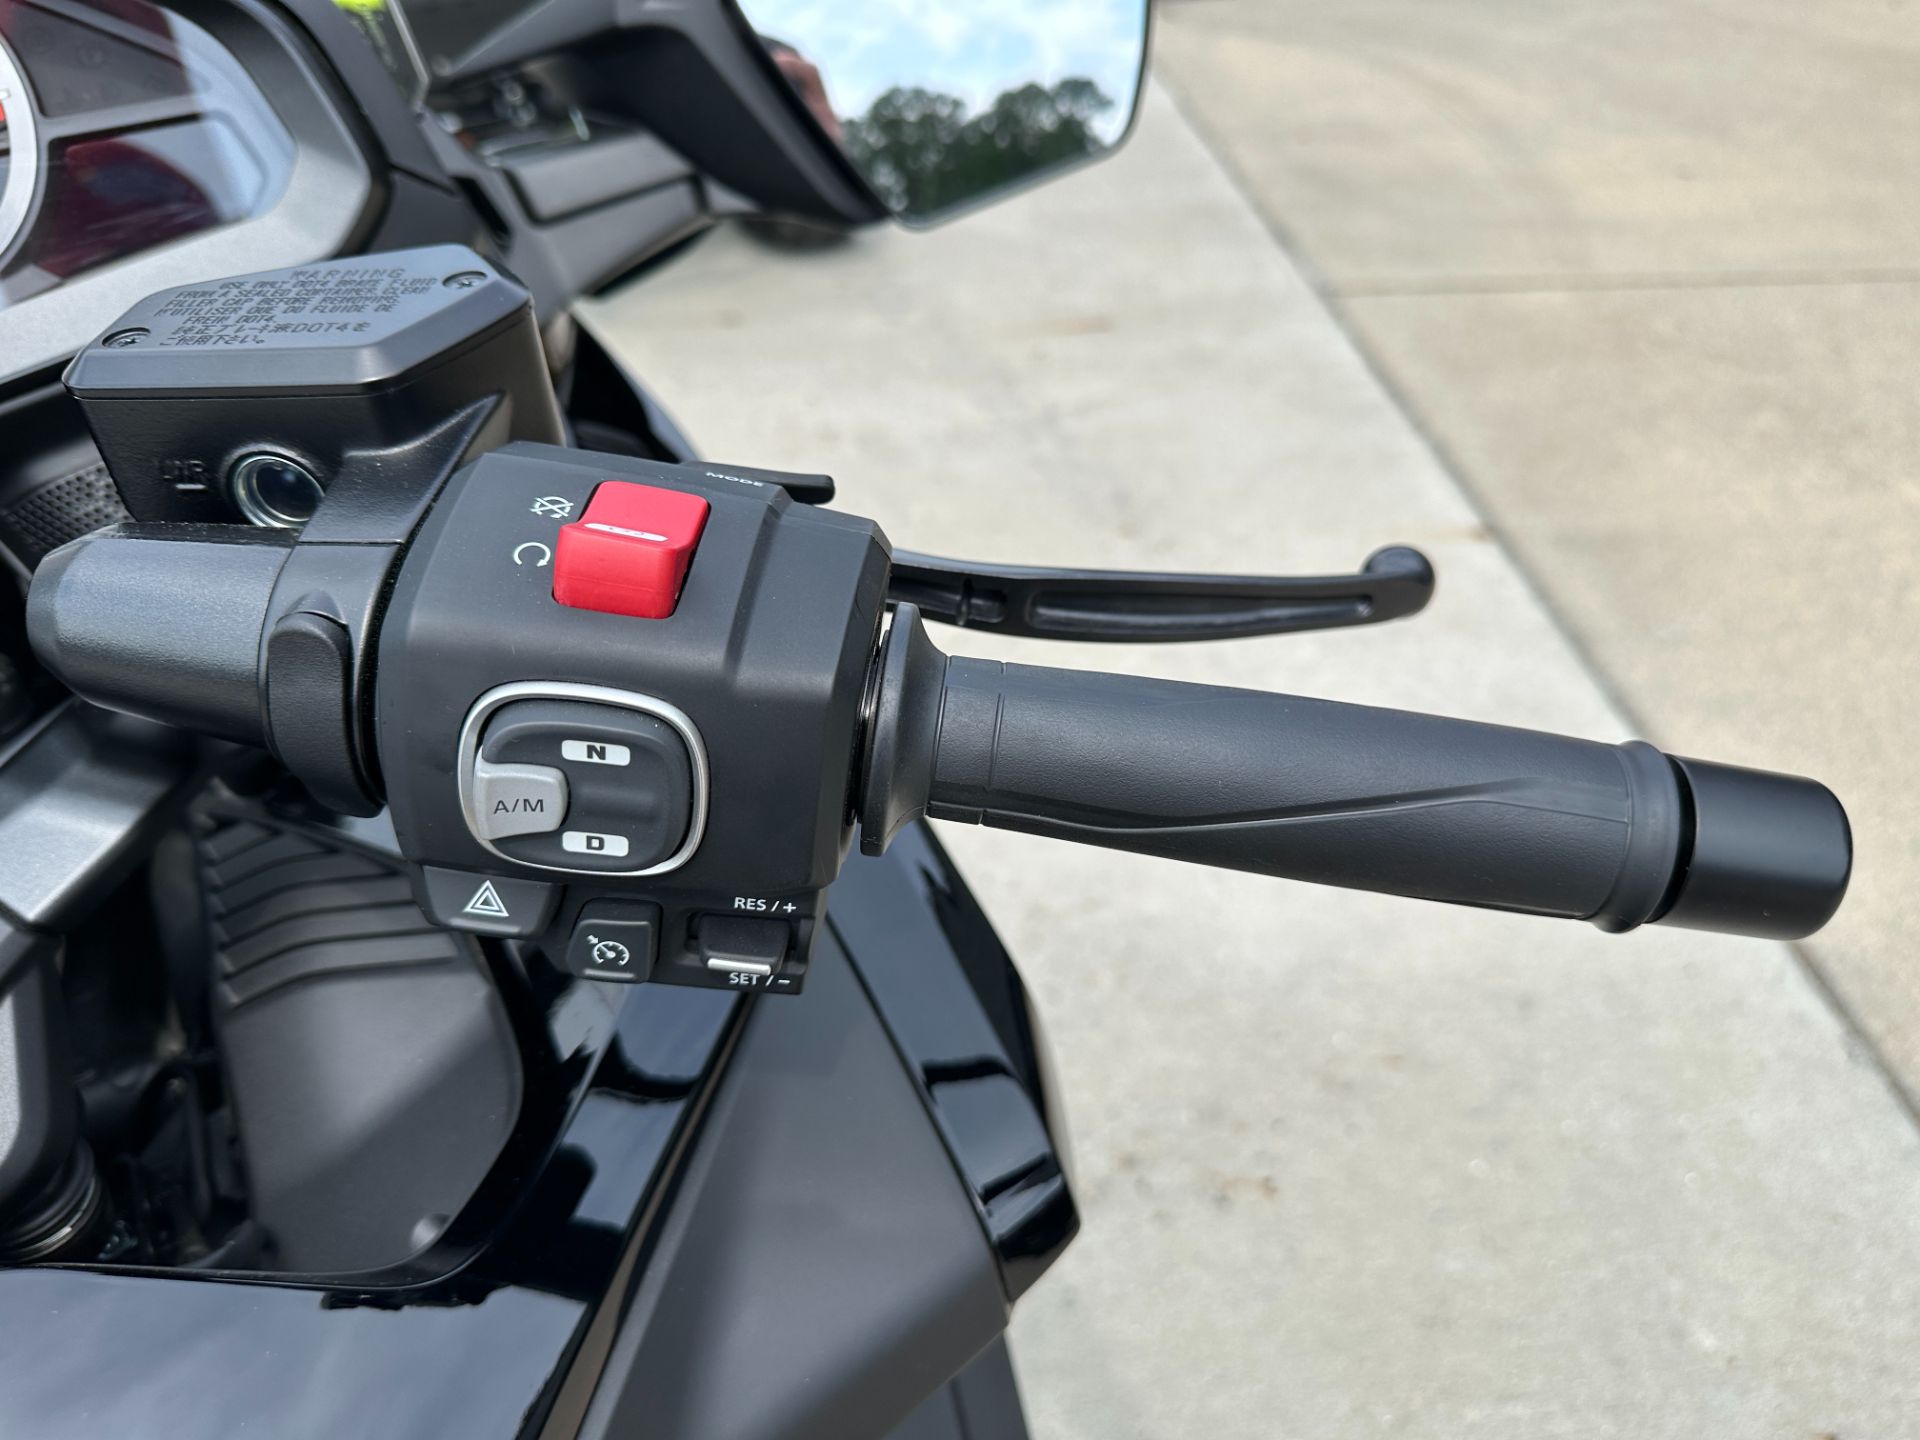 2023 Honda Gold Wing Tour Automatic DCT in Greenville, North Carolina - Photo 33